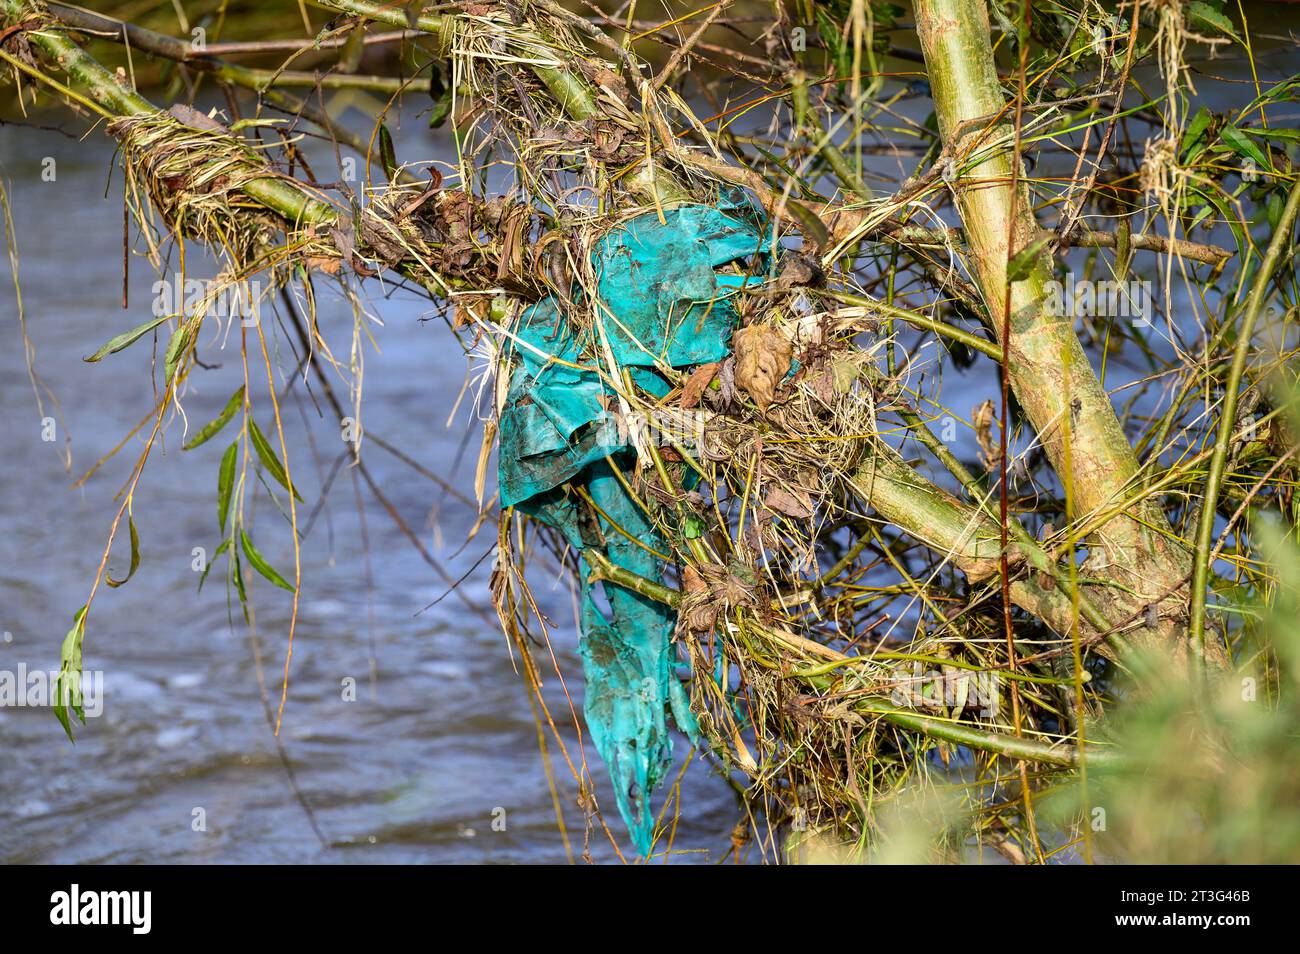 Plastic rubbish caught in the vegitation next to a stream that has recently been in flood. Stock Photo